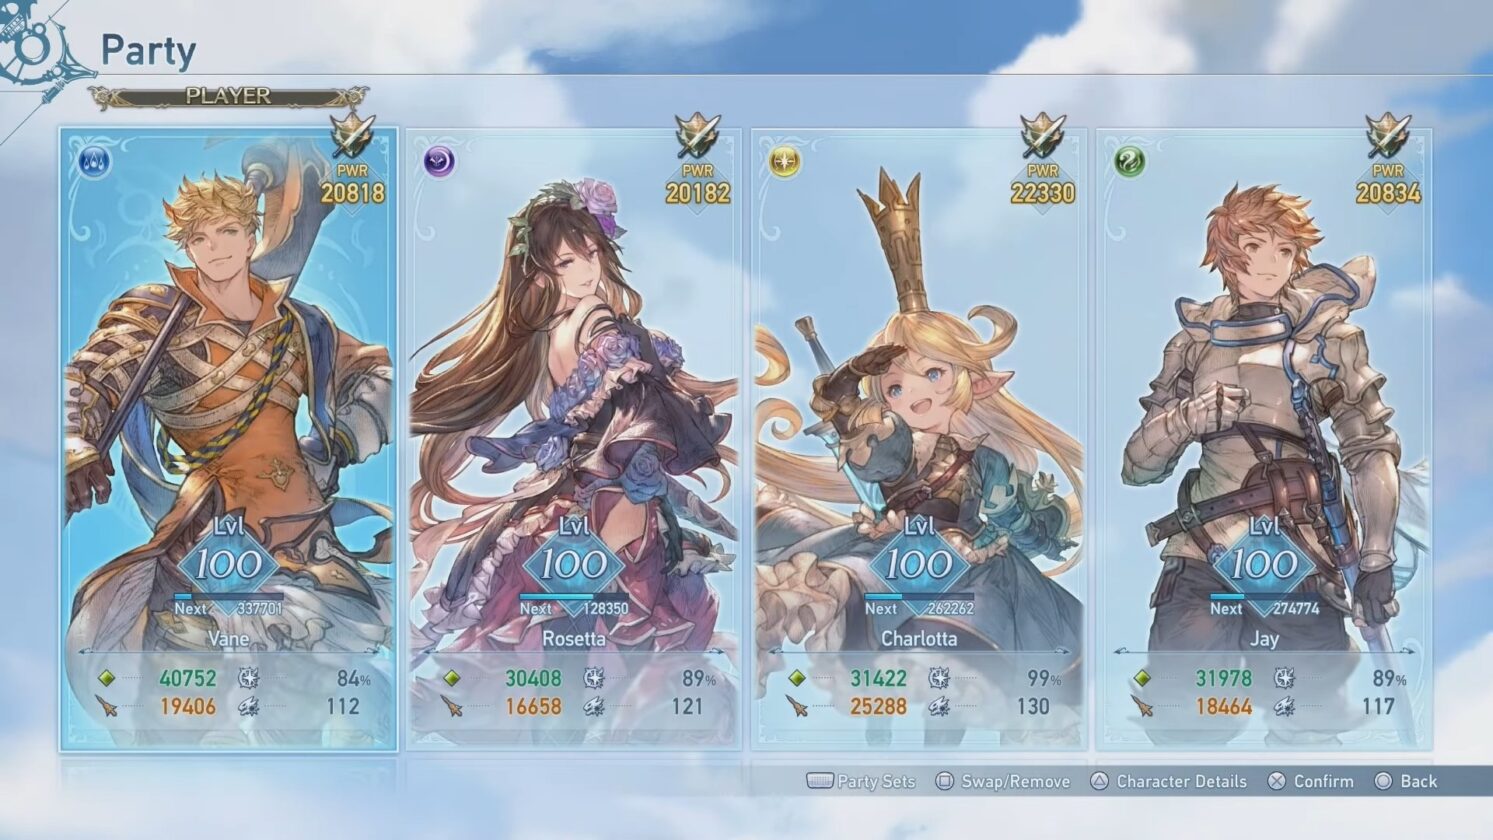 Best Party Composition in GBF Relink